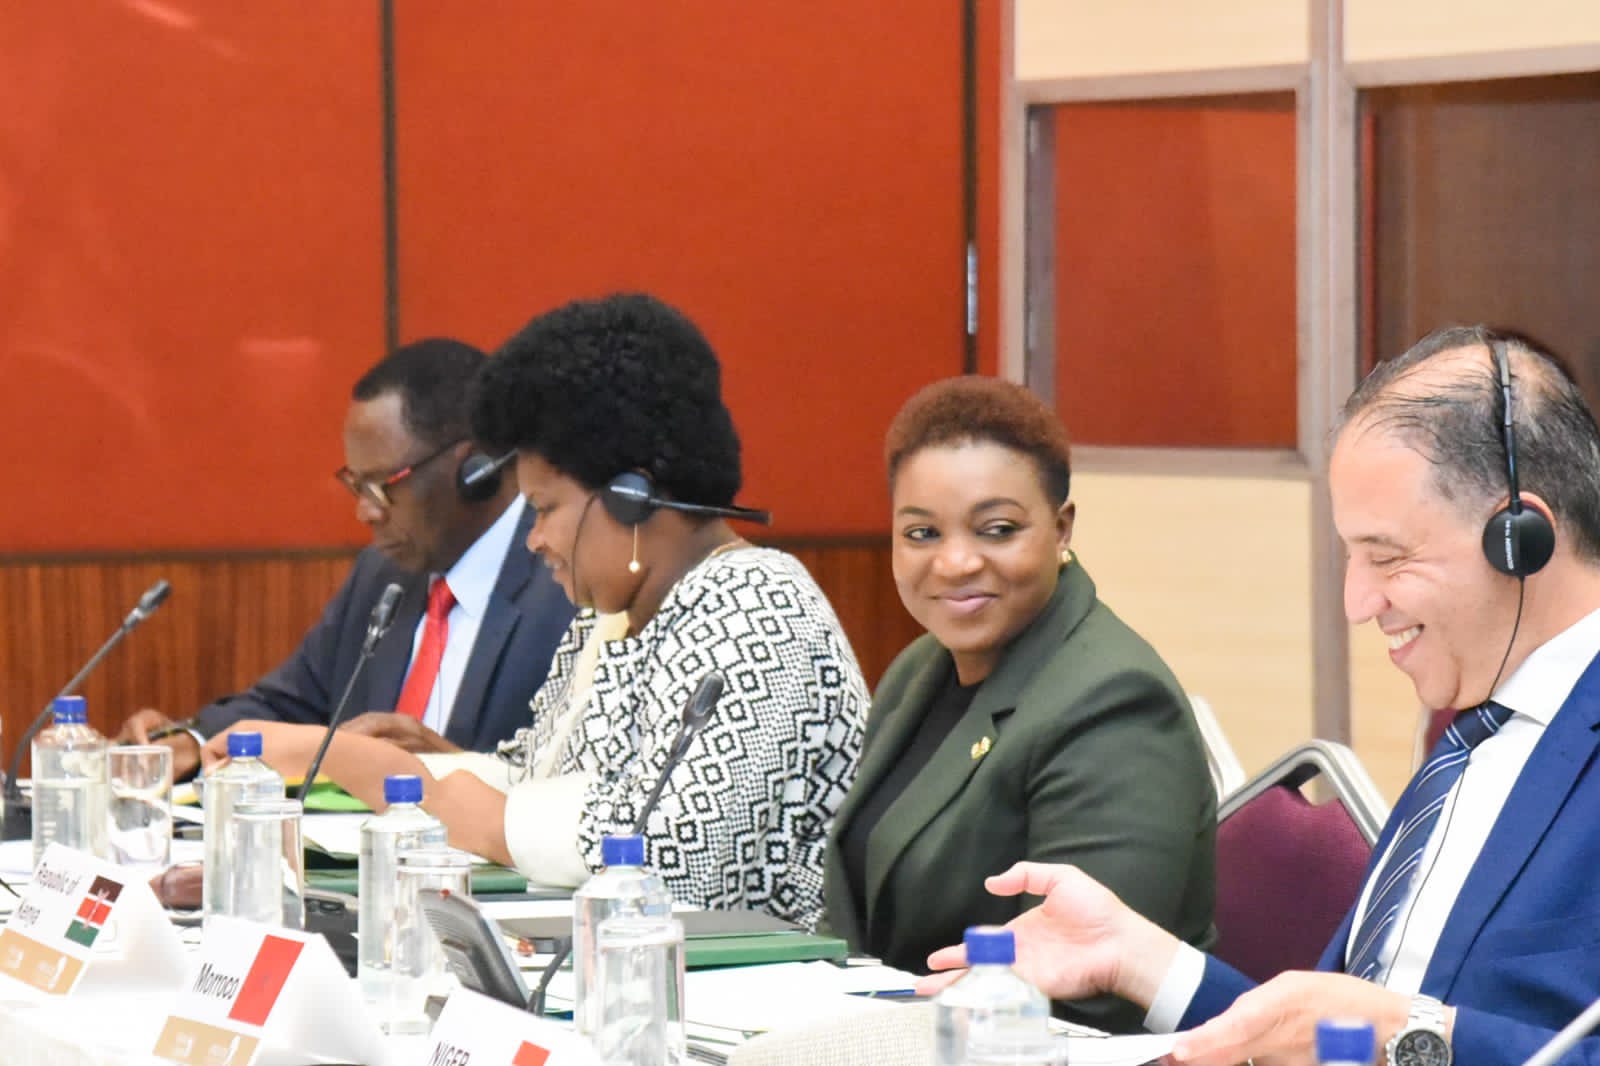 Kenya Hosts 11th Ordinary Session of Africa CDC Governing Board in Nairobi